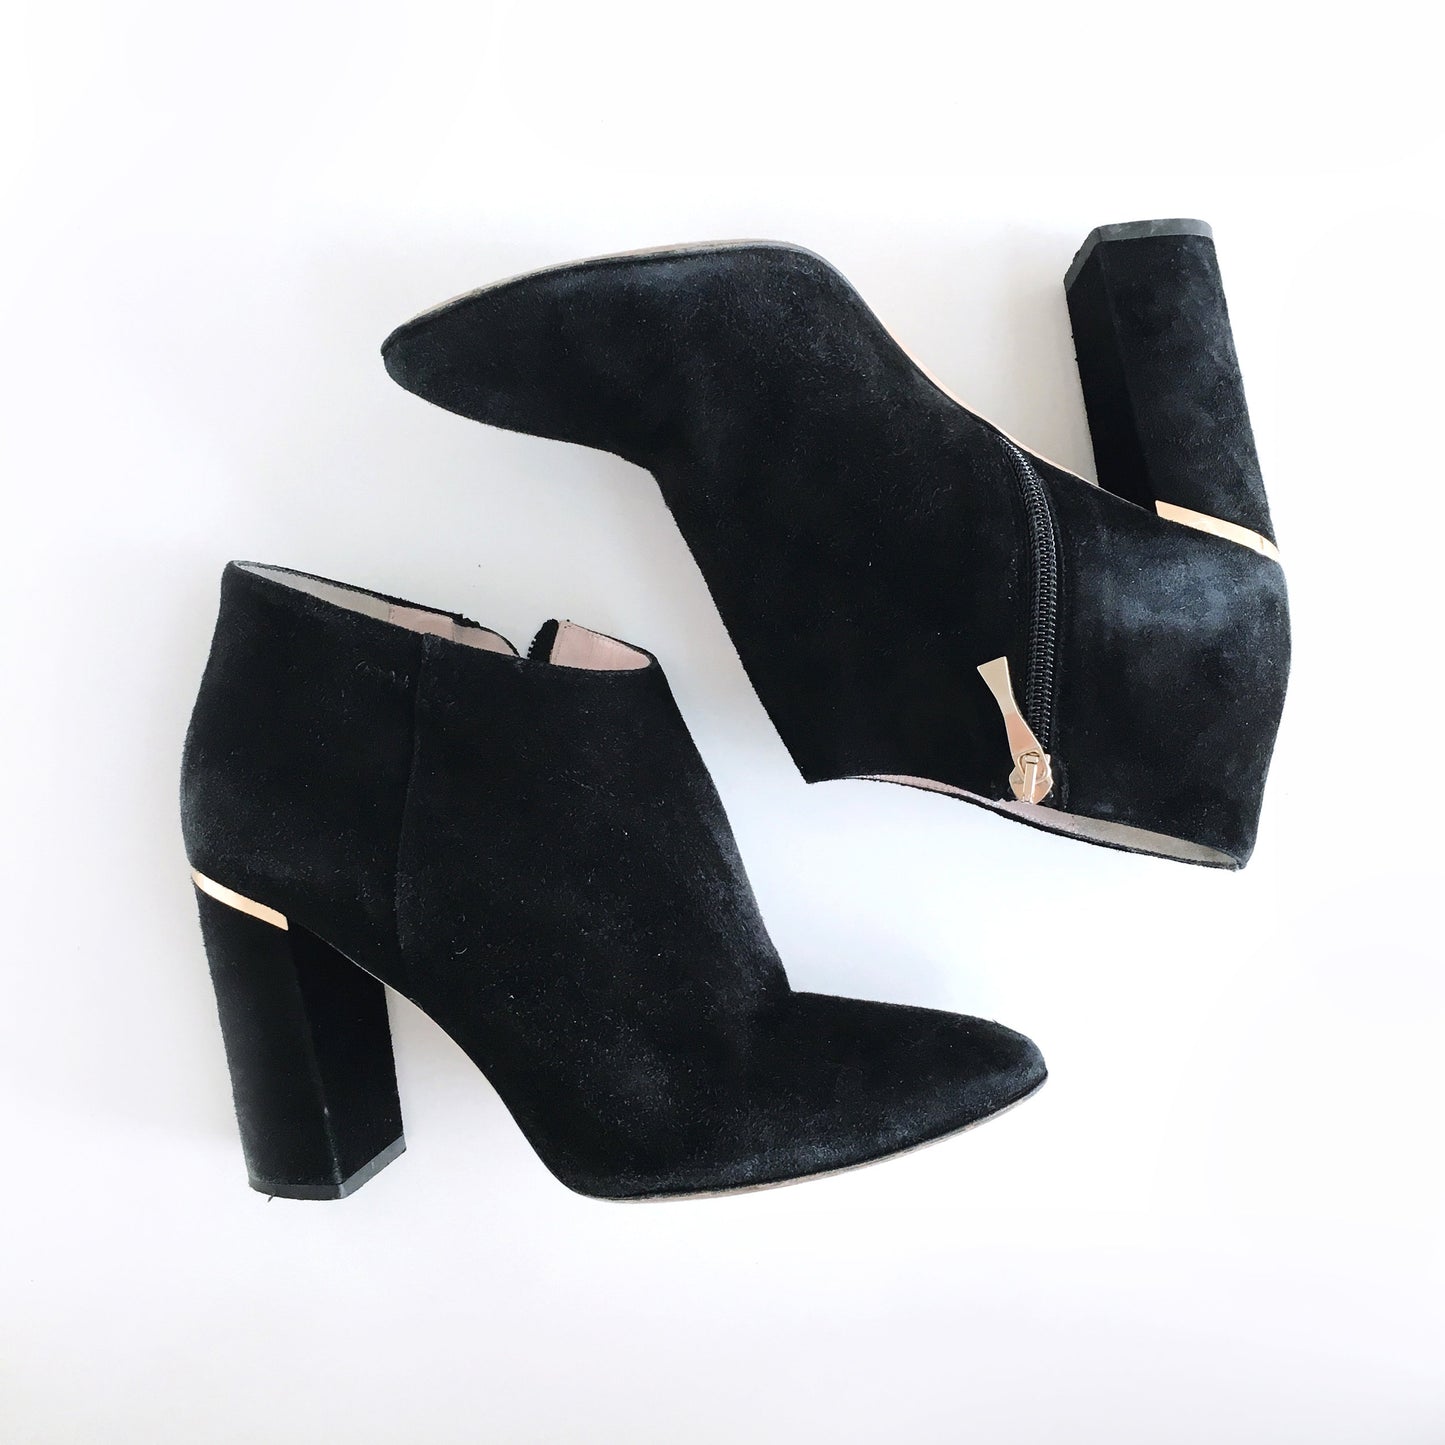 Kate Spade Darota Suede Ankle Bootie - size 9.5